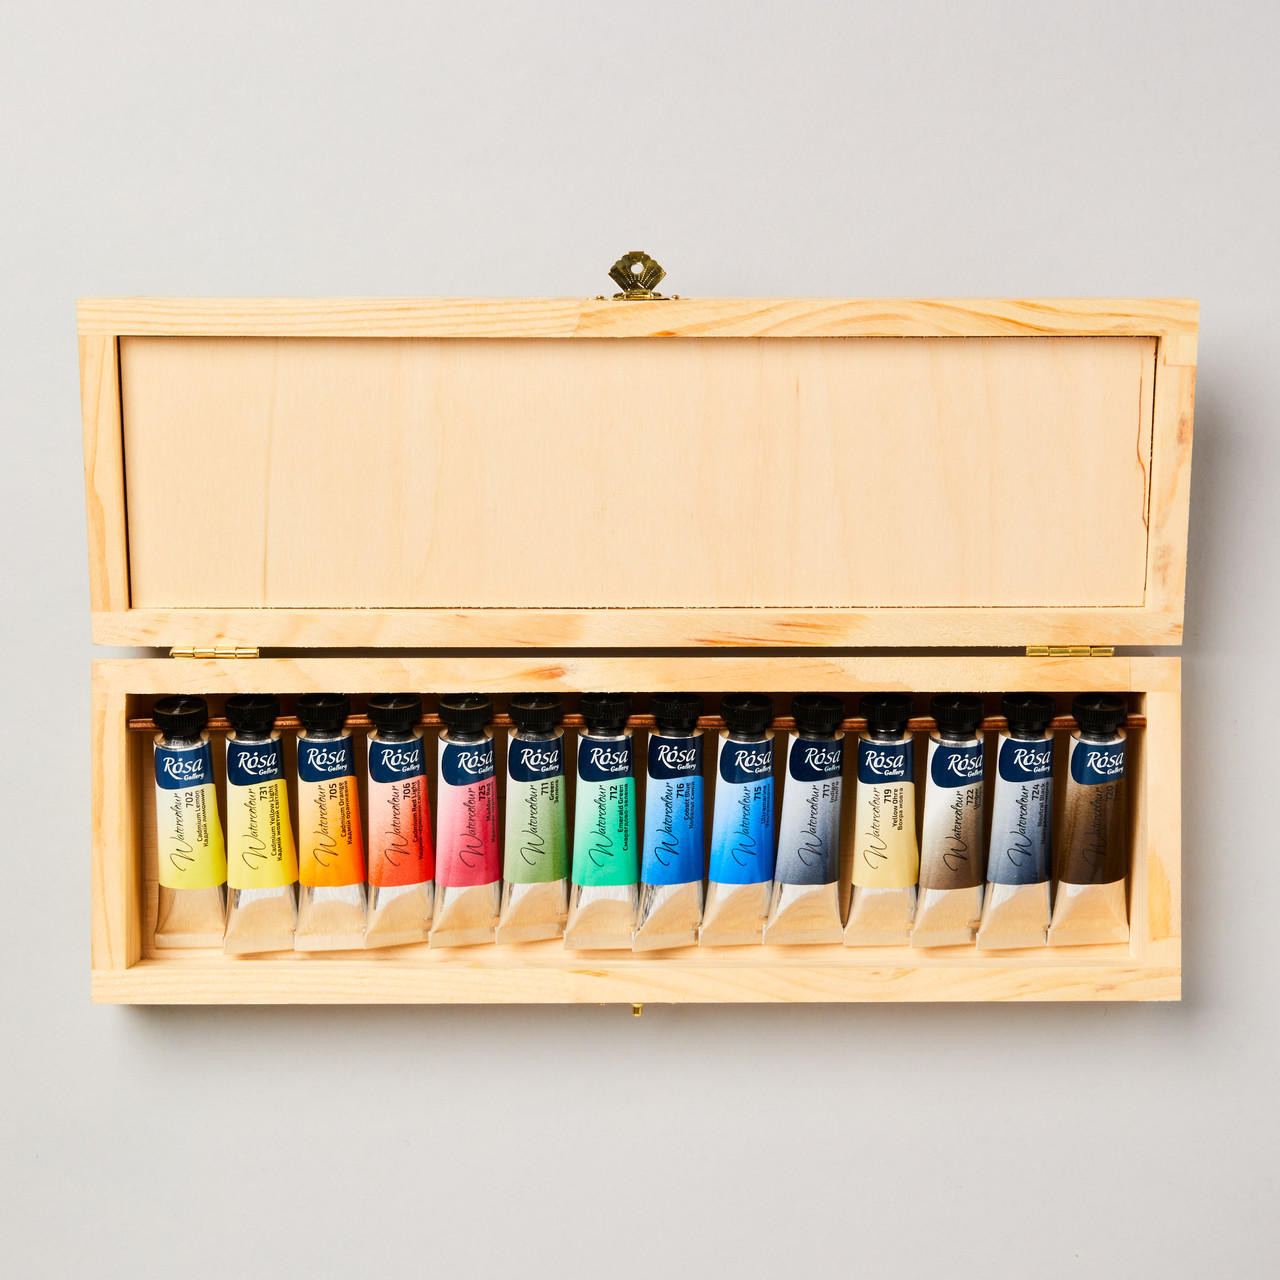 Rosa Gallery Rosa Watercolour in Wooden Box 10ml Assorted Colours Set of 14